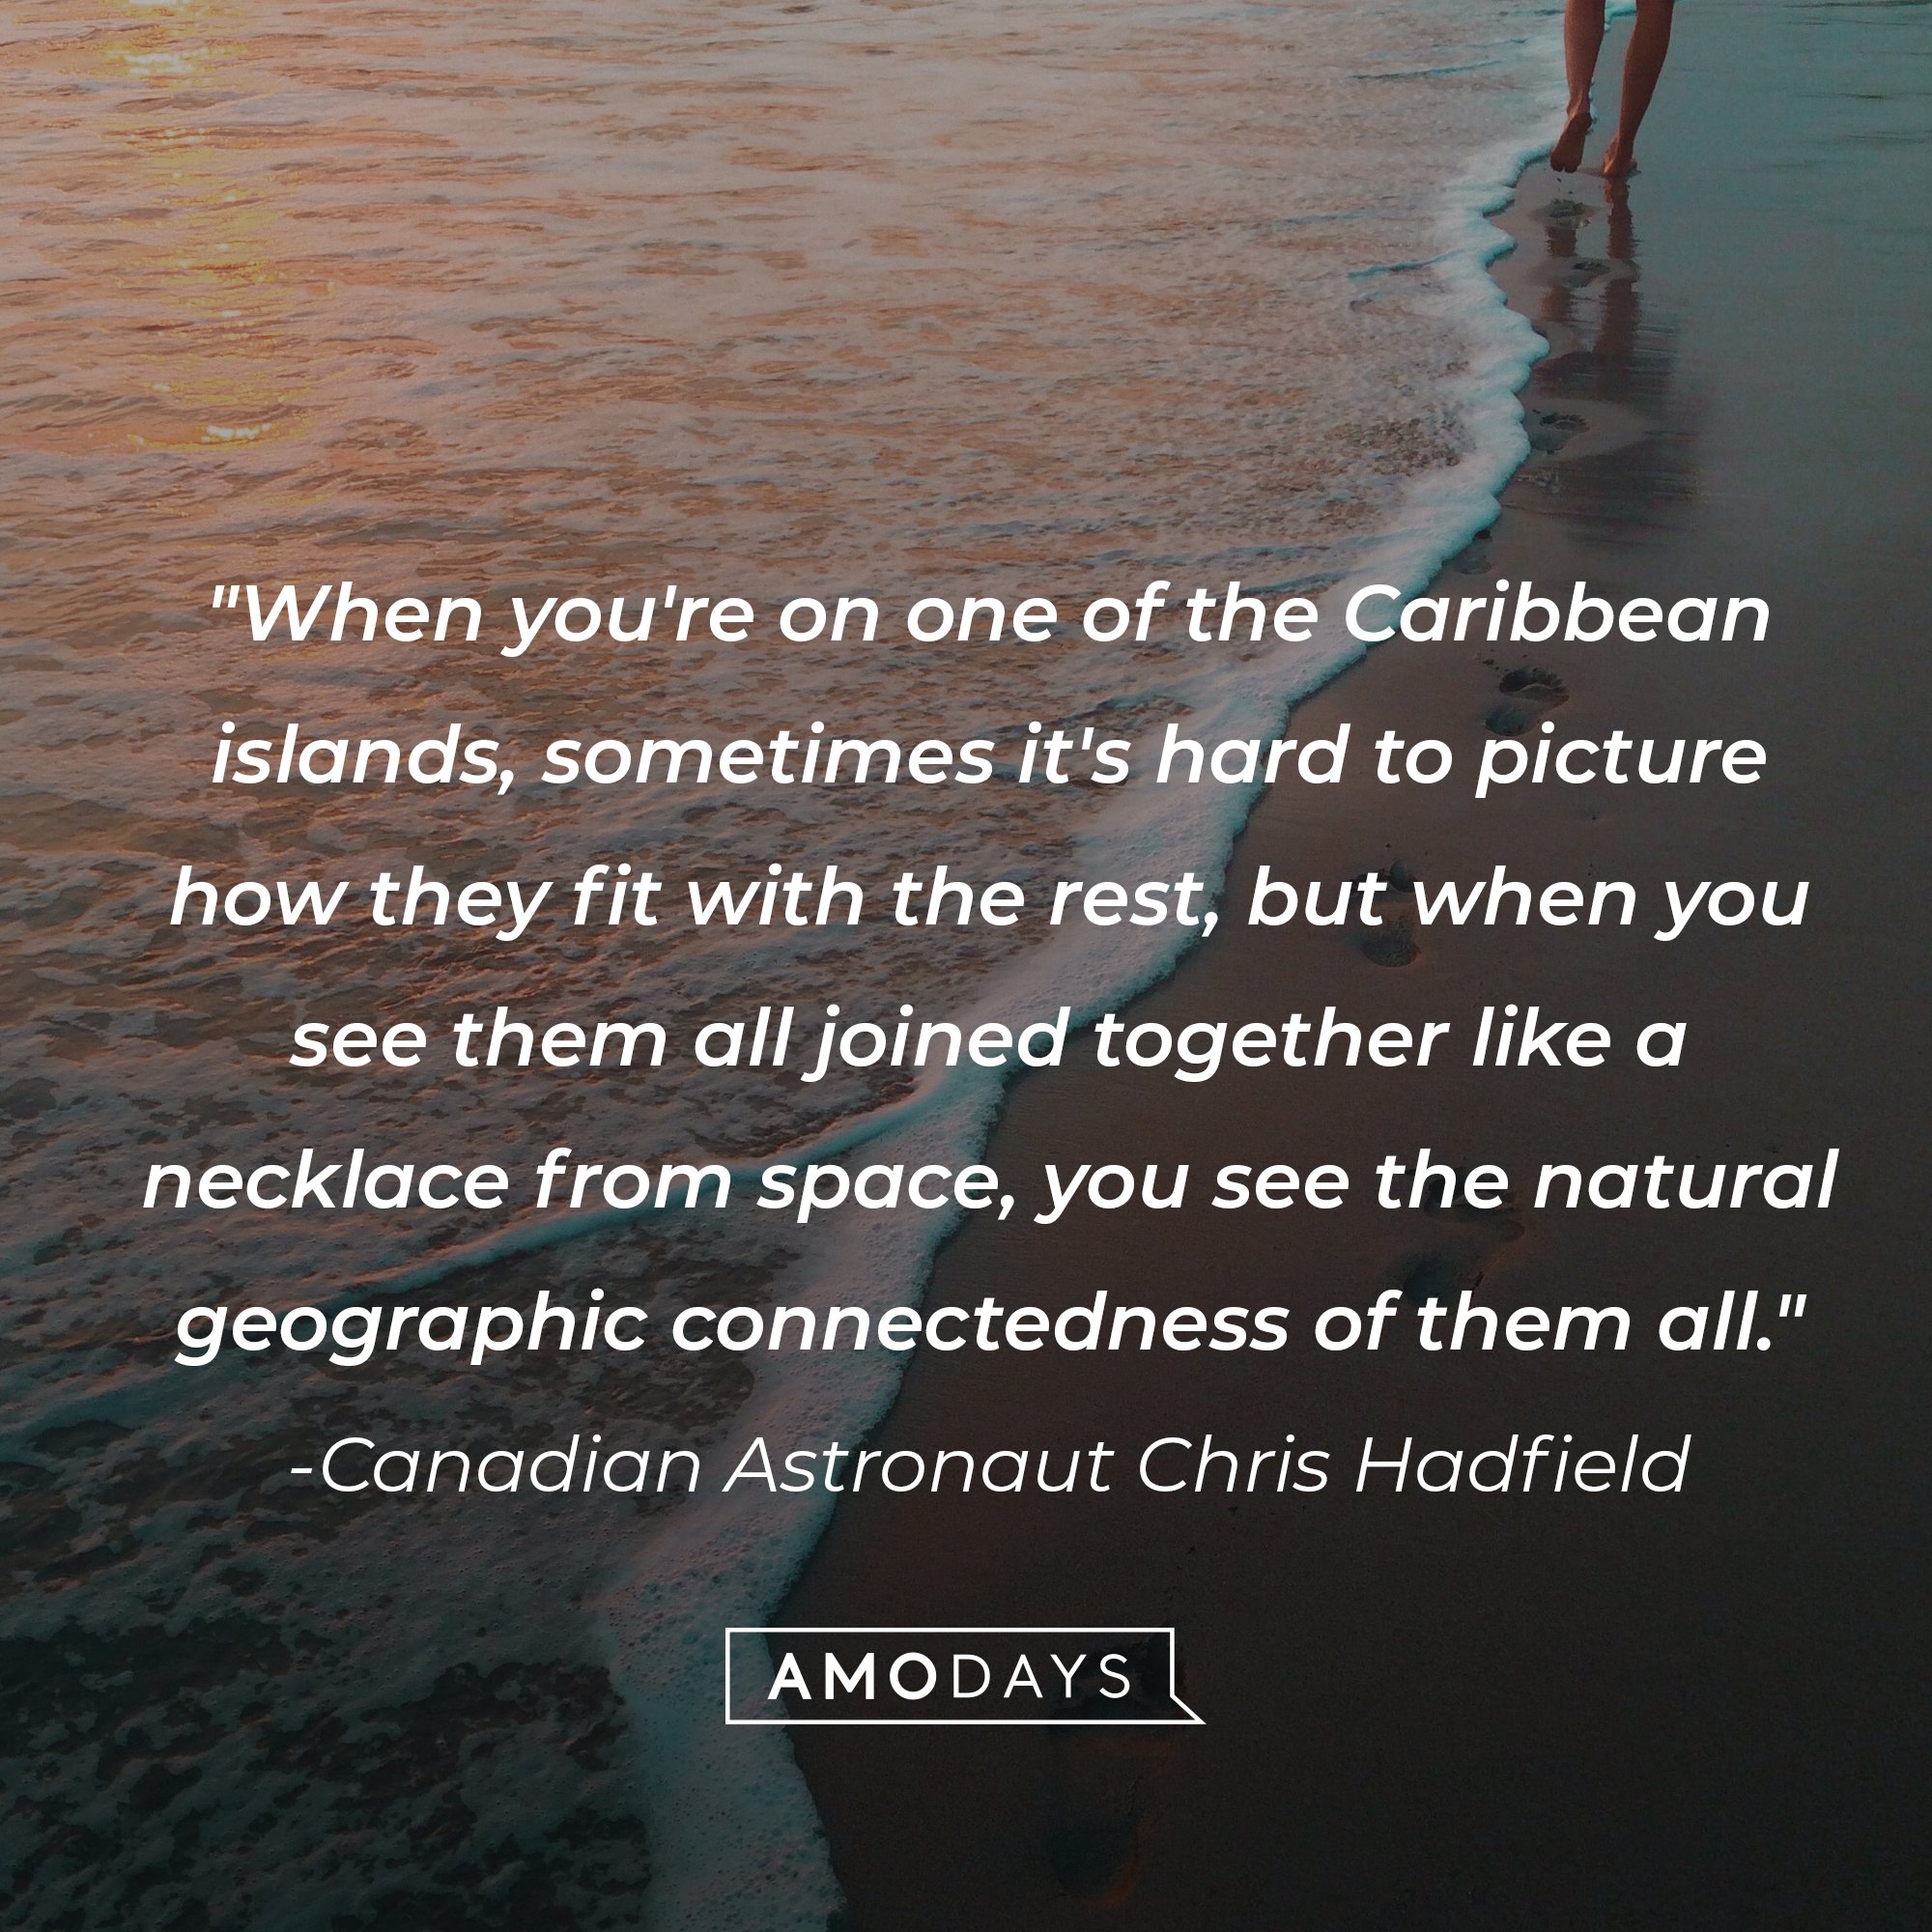 Canadian Astronaut Chris Hadfield's quote: "When you're on one of the Caribbean islands, sometimes it's hard to picture how they fit with the rest, but when you see them all joined together like a necklace from space, you see the natural geographic connectedness of them all." | Image: AmoDays